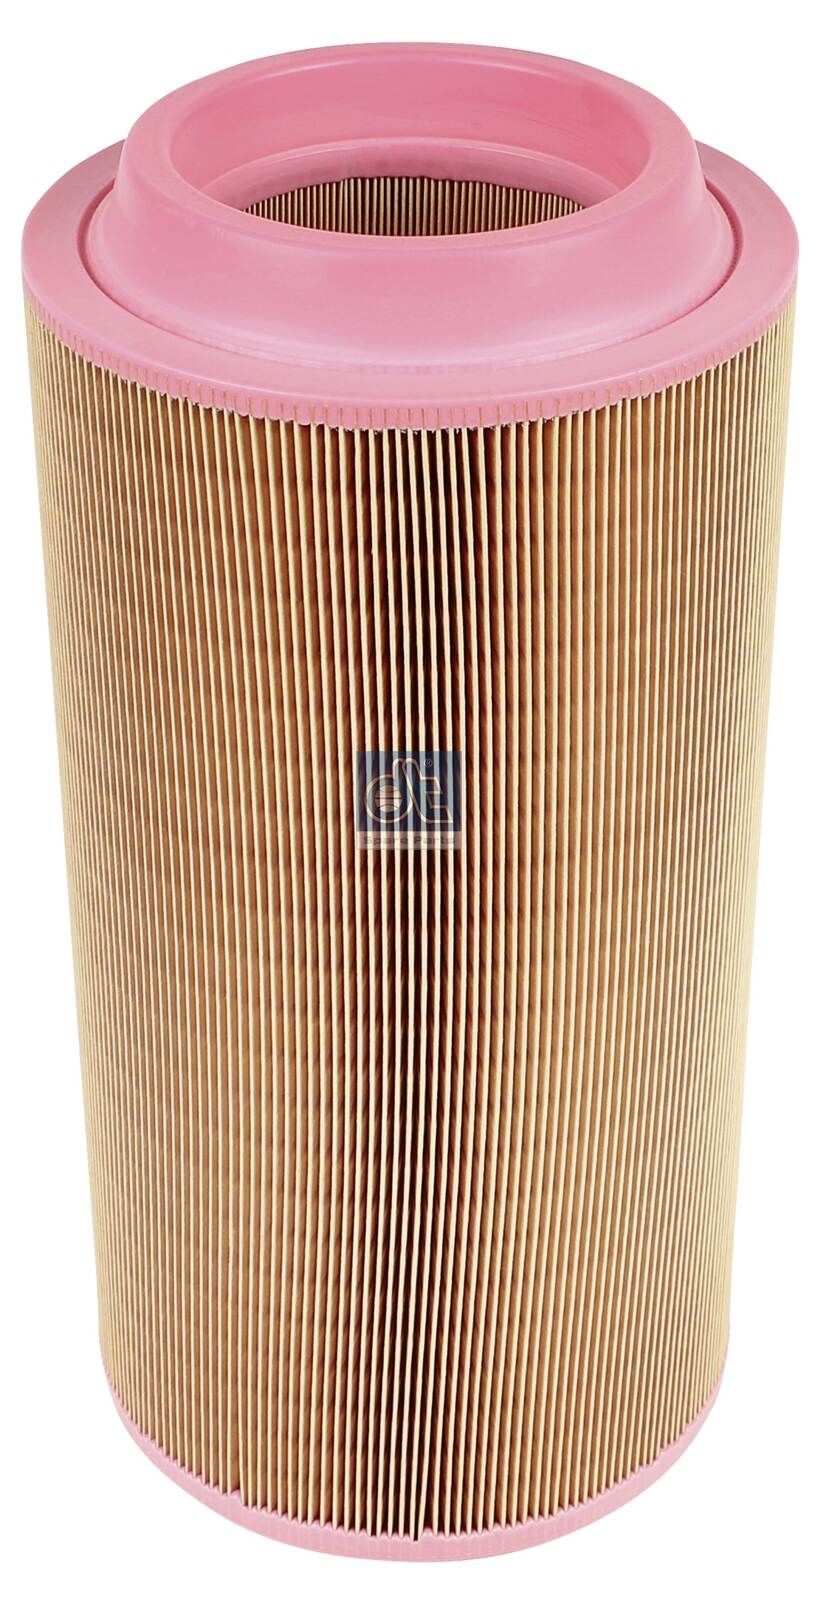 C 20 500 DT Spare Parts 4.65866 Air filter 702 6330